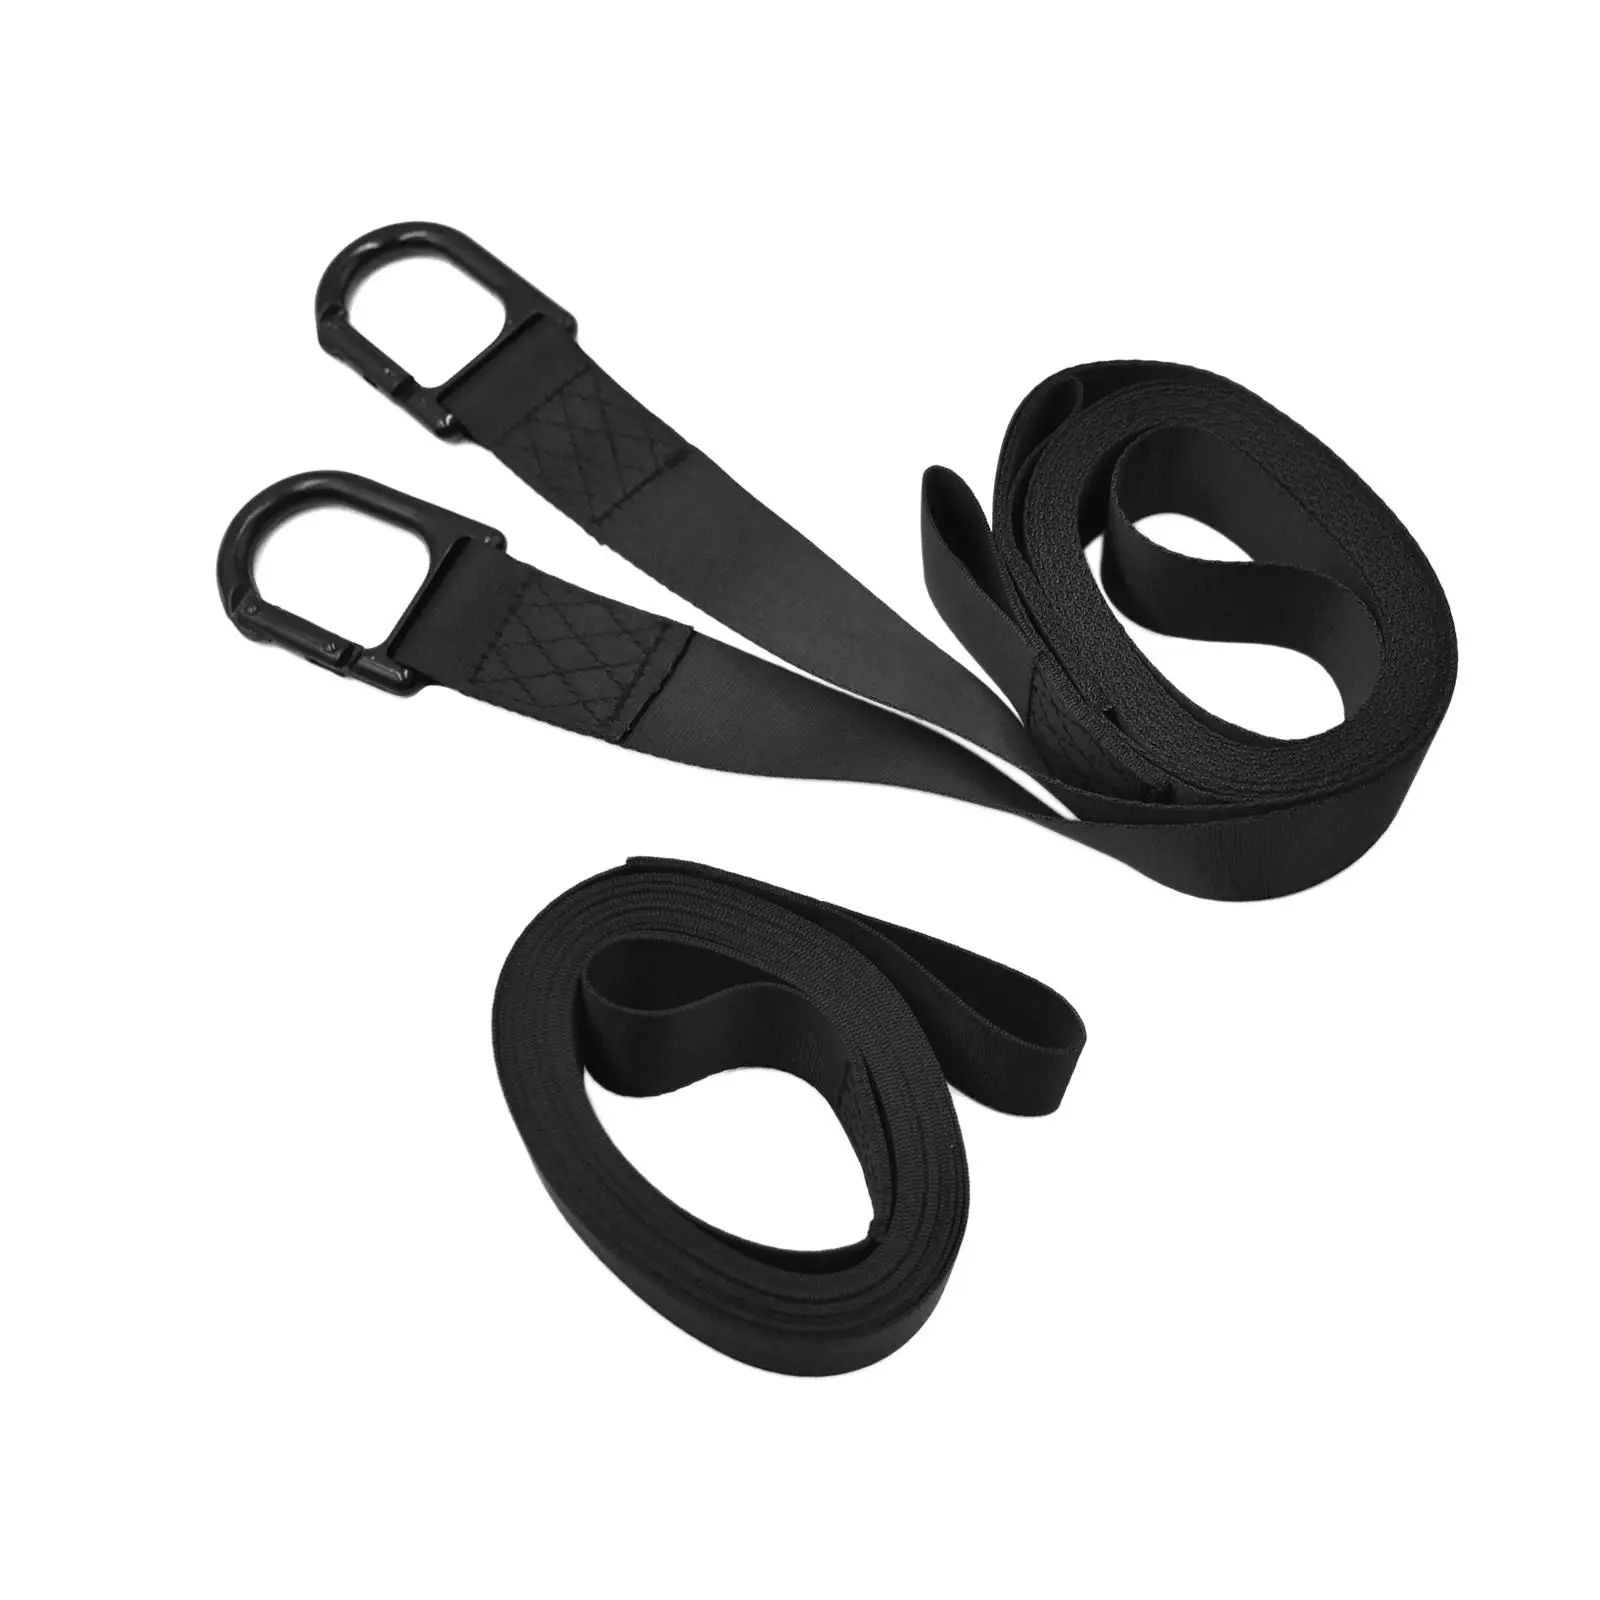 Snowmobile Tow Straps for Heavy Duty Snowmobile,sled or ATV with Two Hooks Quick Hook up and Tow Easilly Sled Pulling Straps